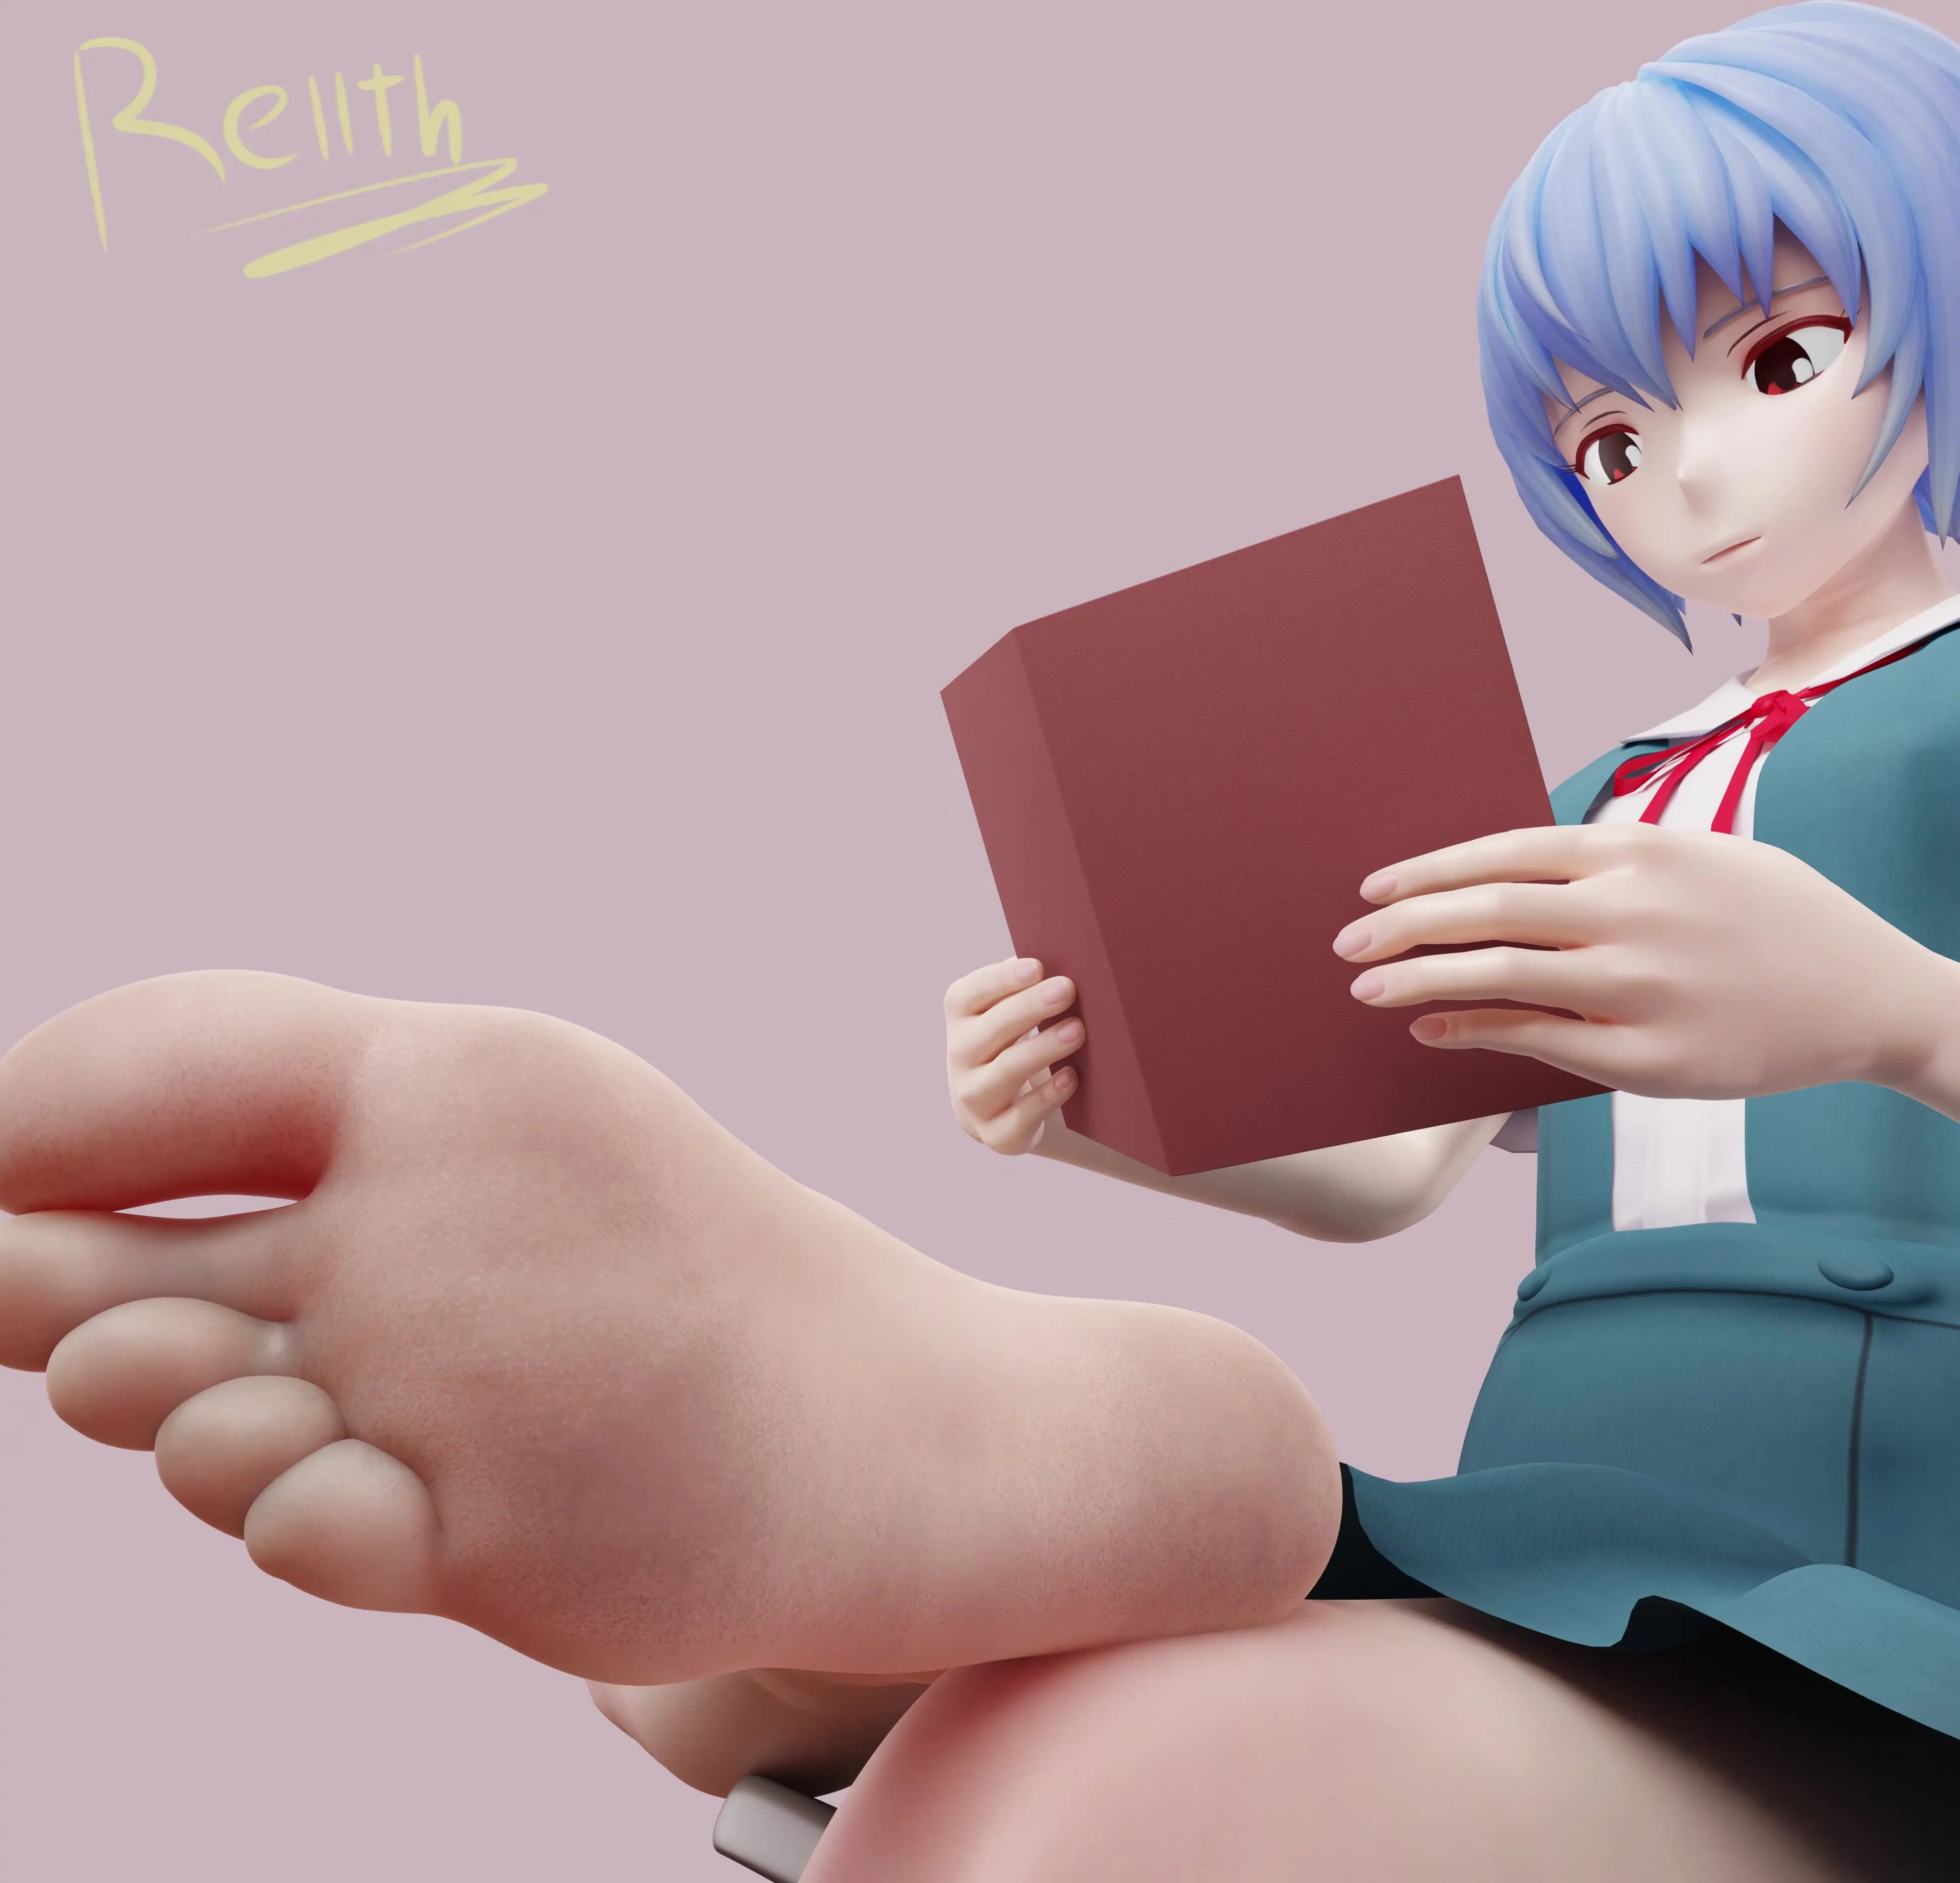 Sexy shit: Rei Ayanami - 3D Feet - ThisVid.com